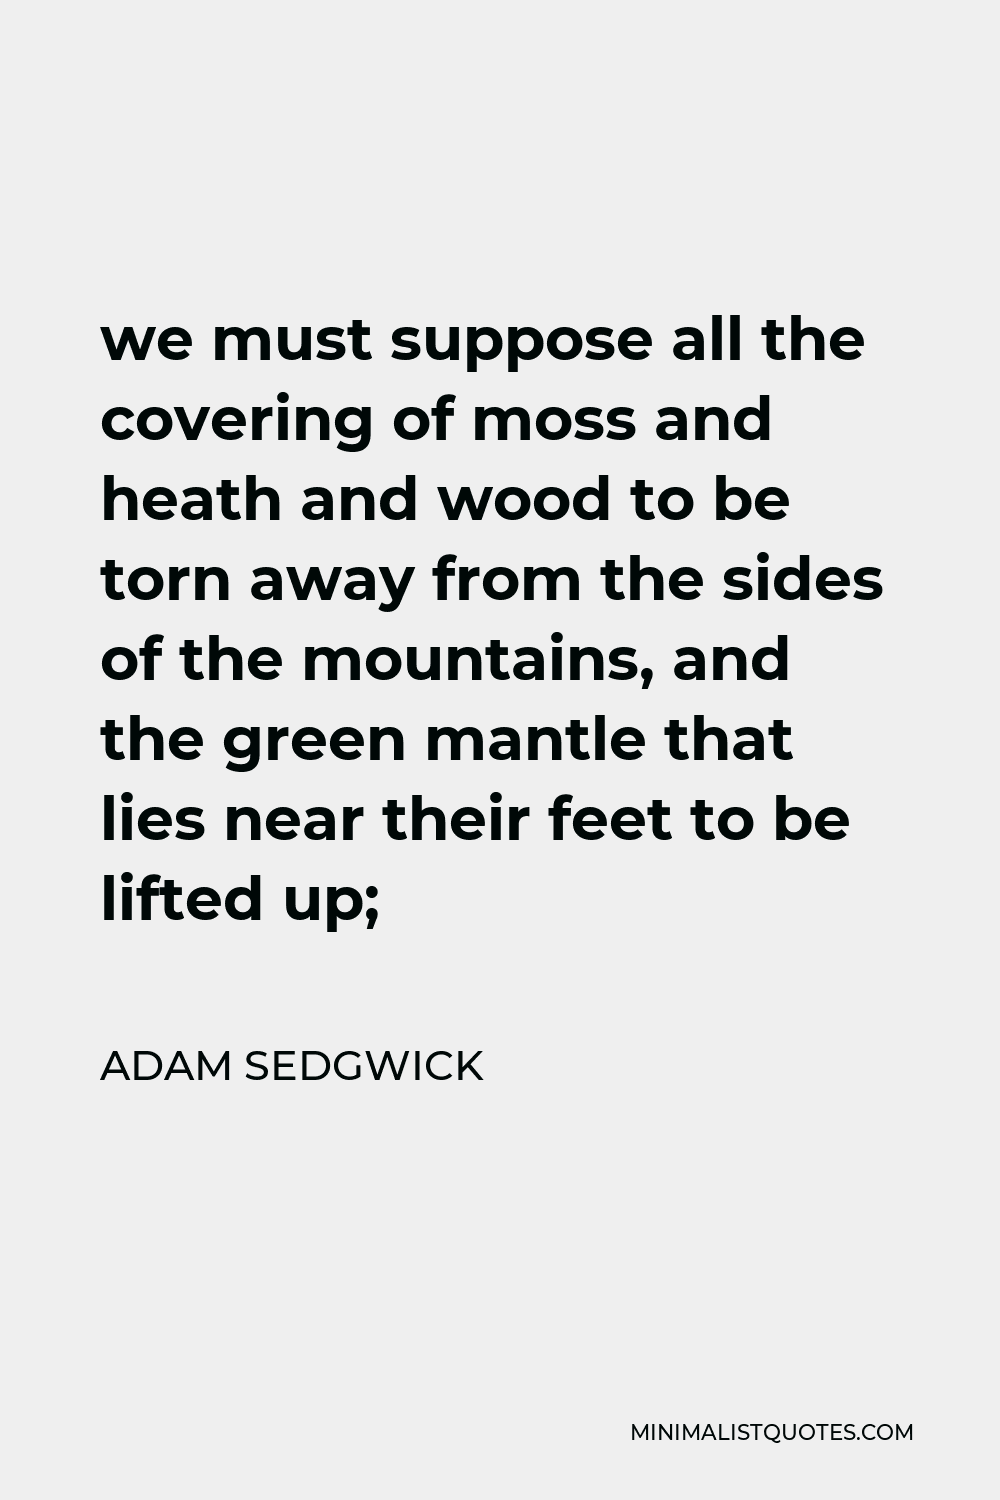 Adam Sedgwick Quote - we must suppose all the covering of moss and heath and wood to be torn away from the sides of the mountains, and the green mantle that lies near their feet to be lifted up;